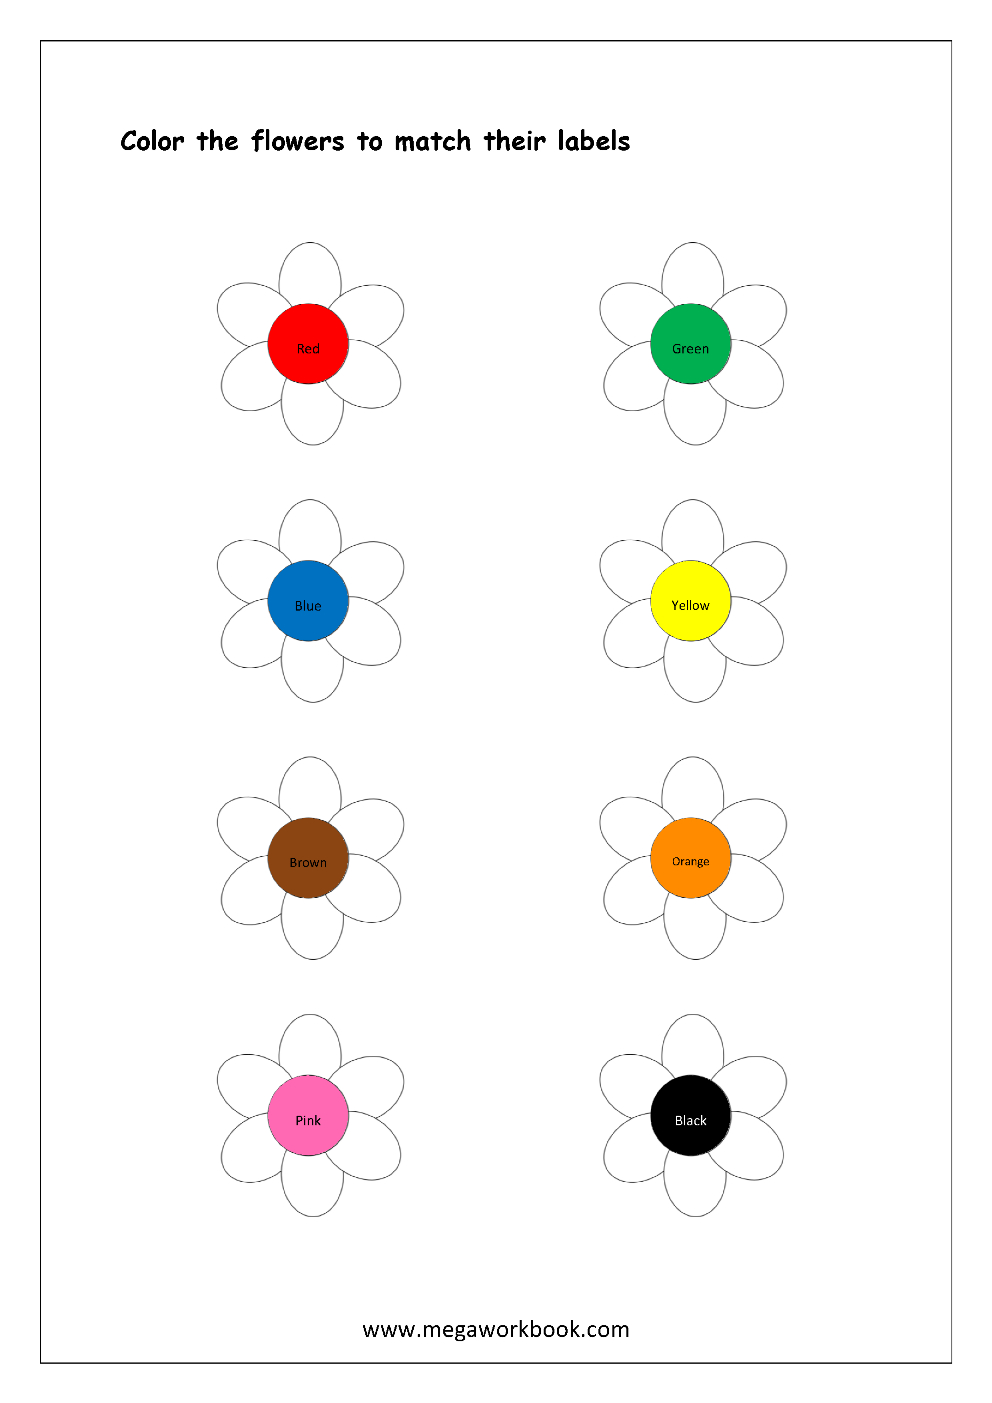 Free Printable Color Recognition Worksheets - Colormatching Hint - Color Recognition Worksheets Free Printable